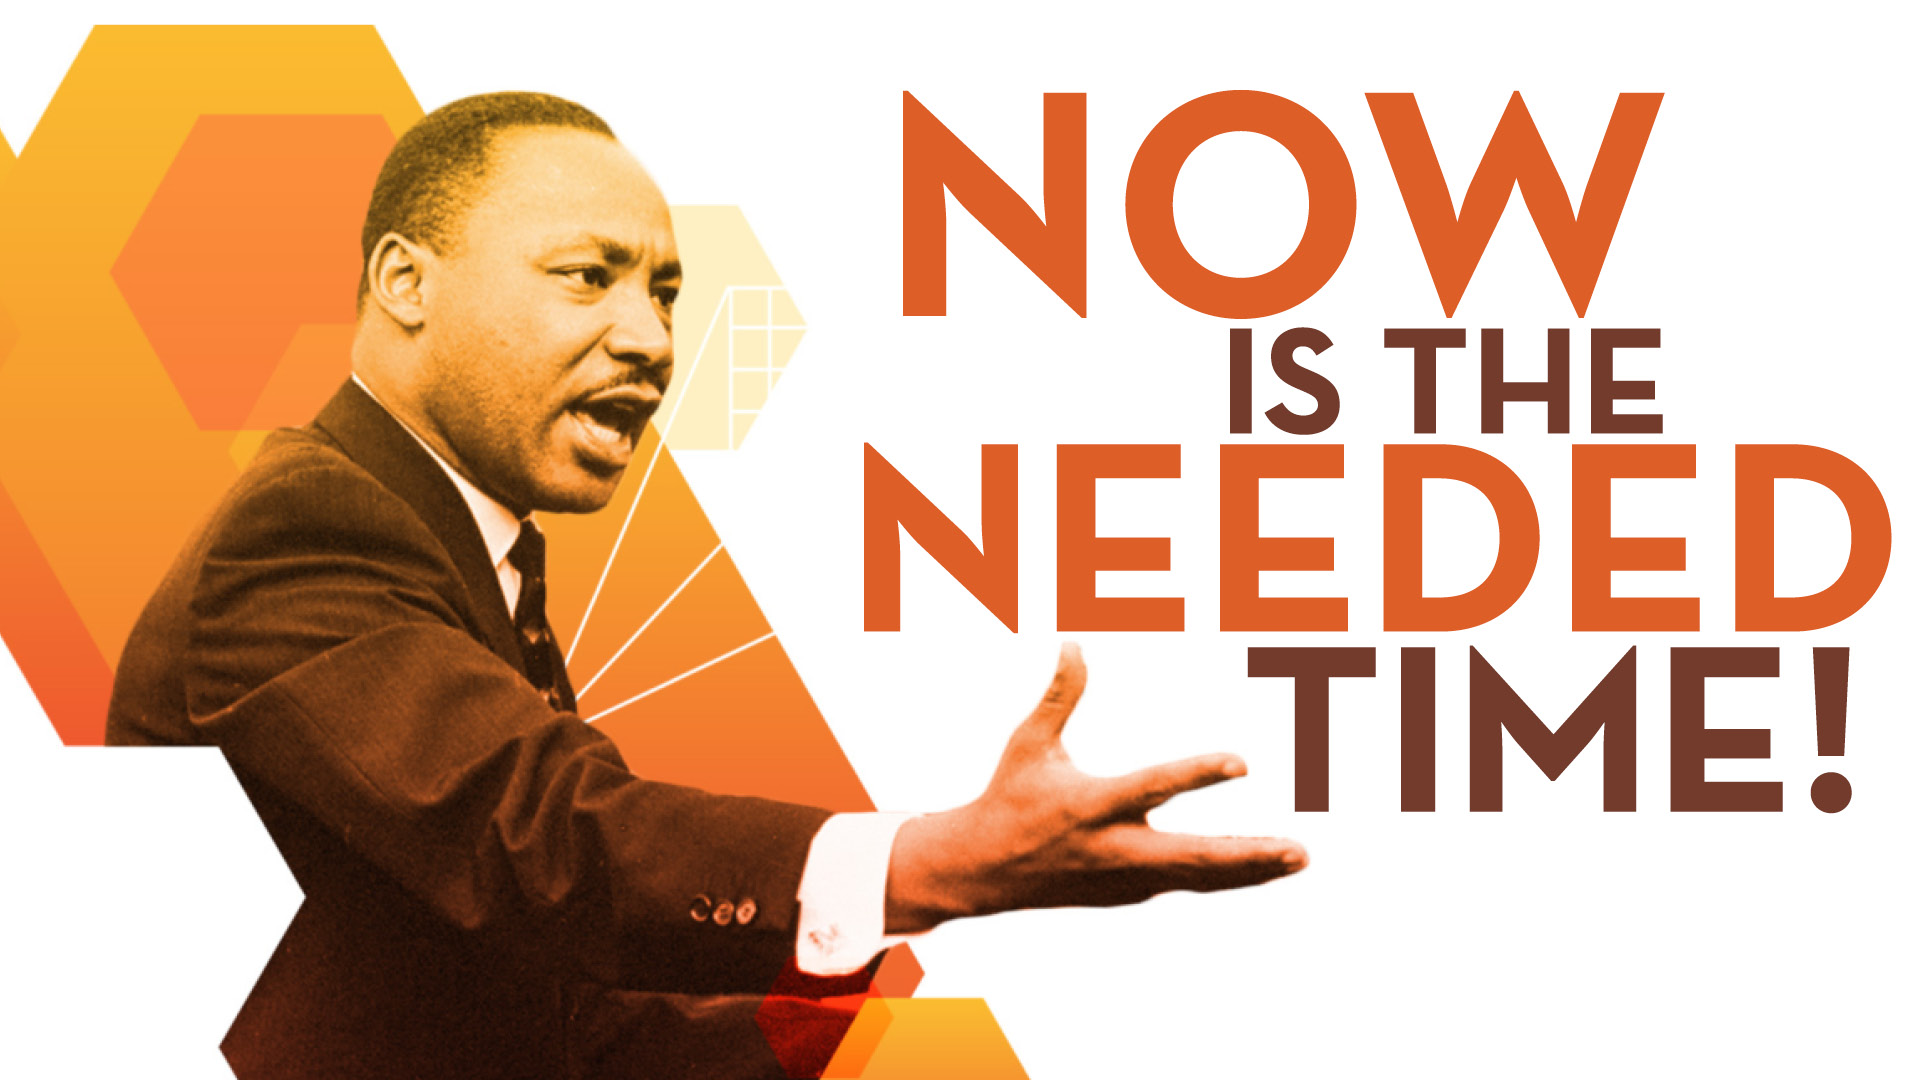 Dr. Martin Luther King, Jr. - Now is the needed time!